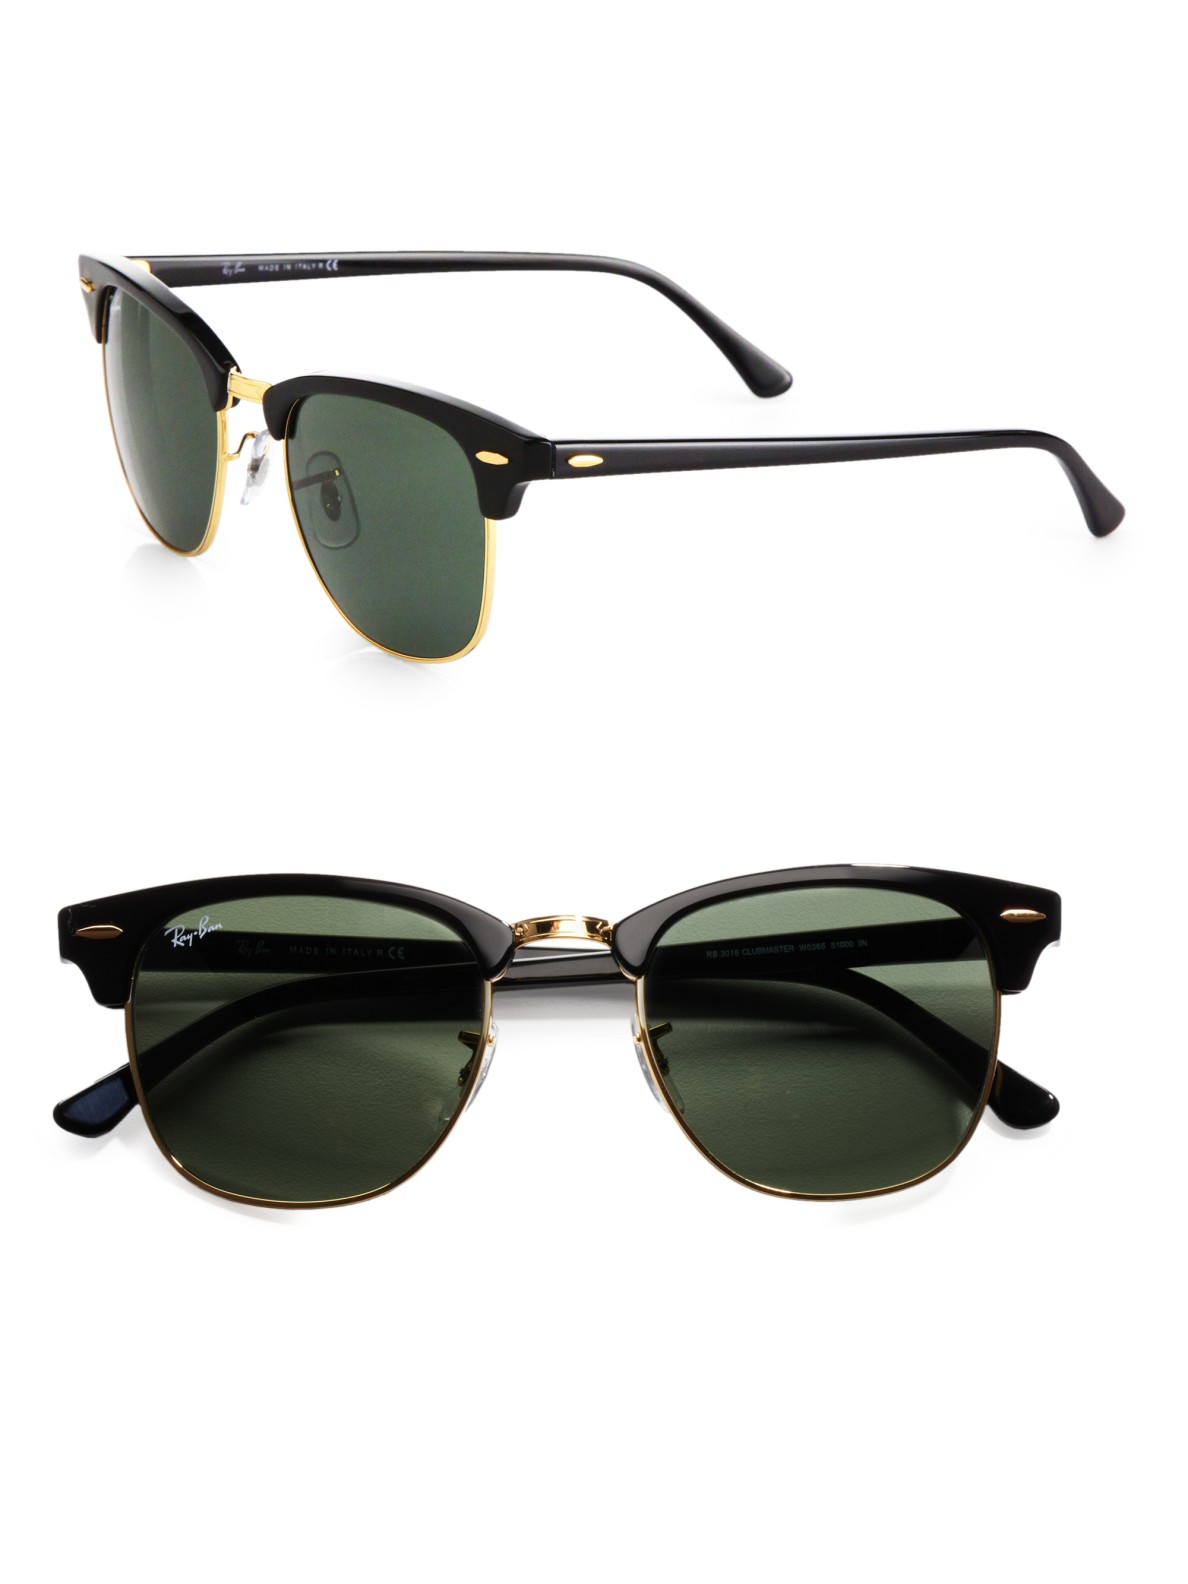 Lyst - Ray-ban Classic Clubmaster Sunglasses in Black for Men